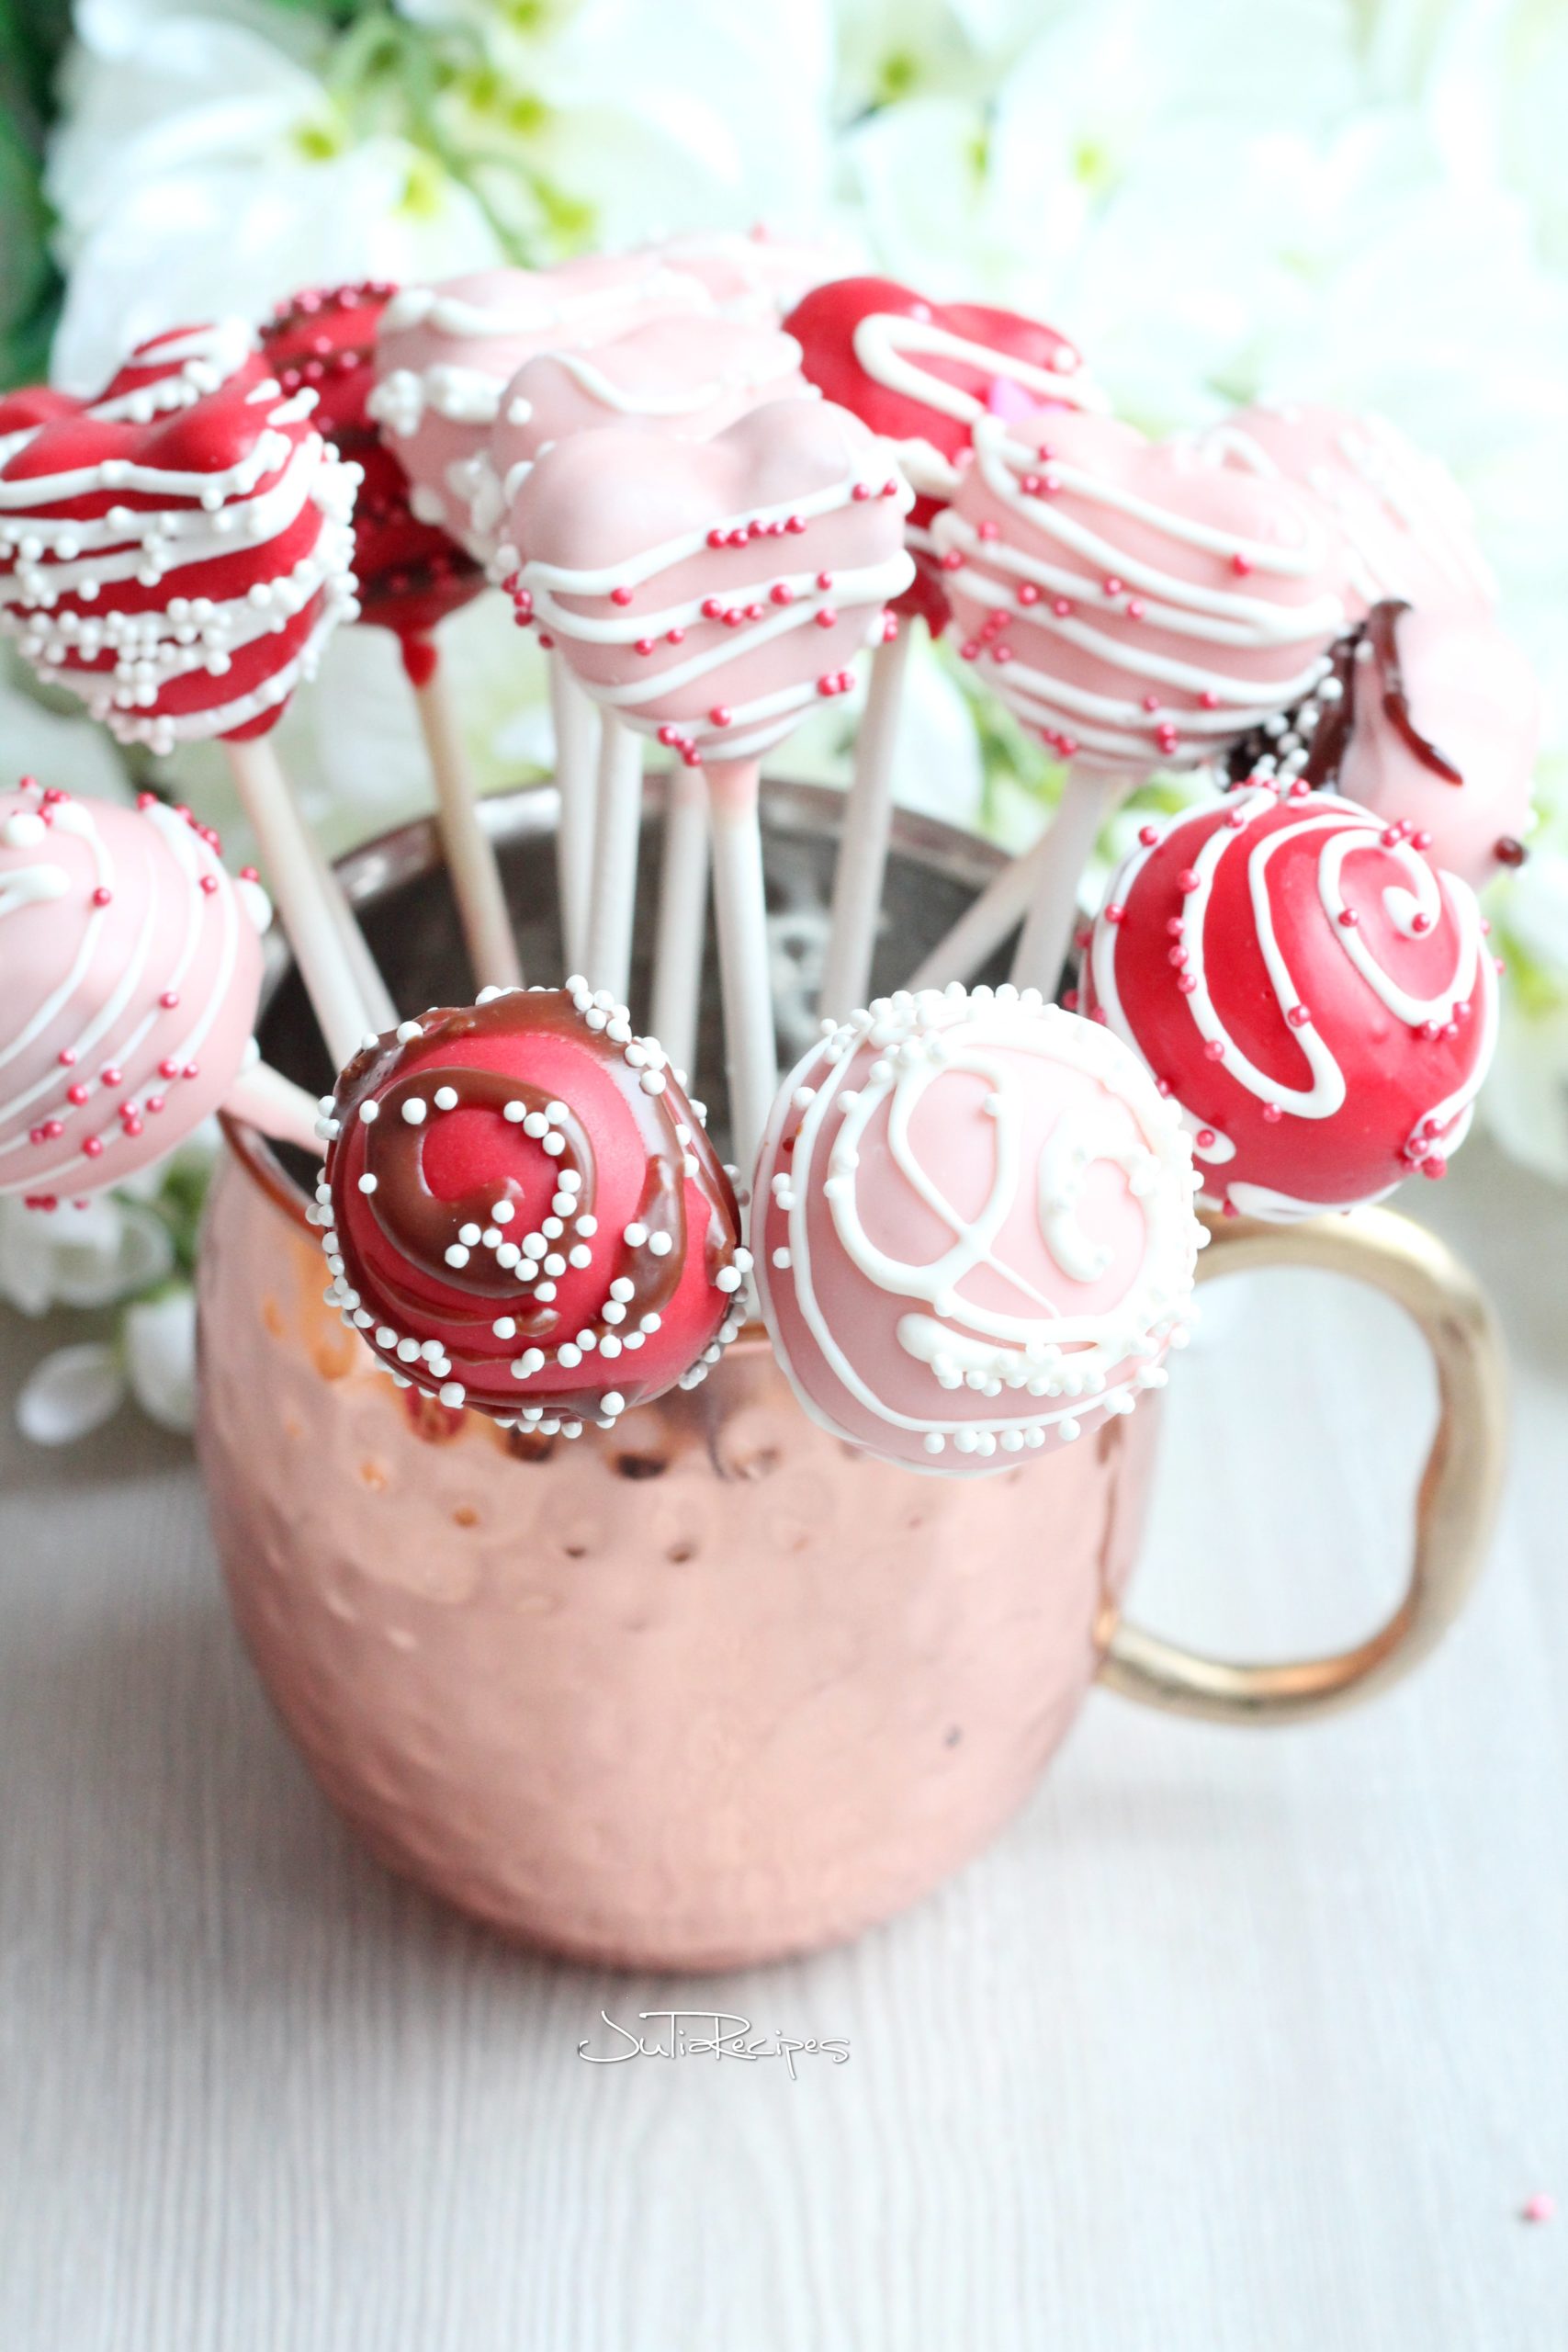 pink and red cake pops in mug